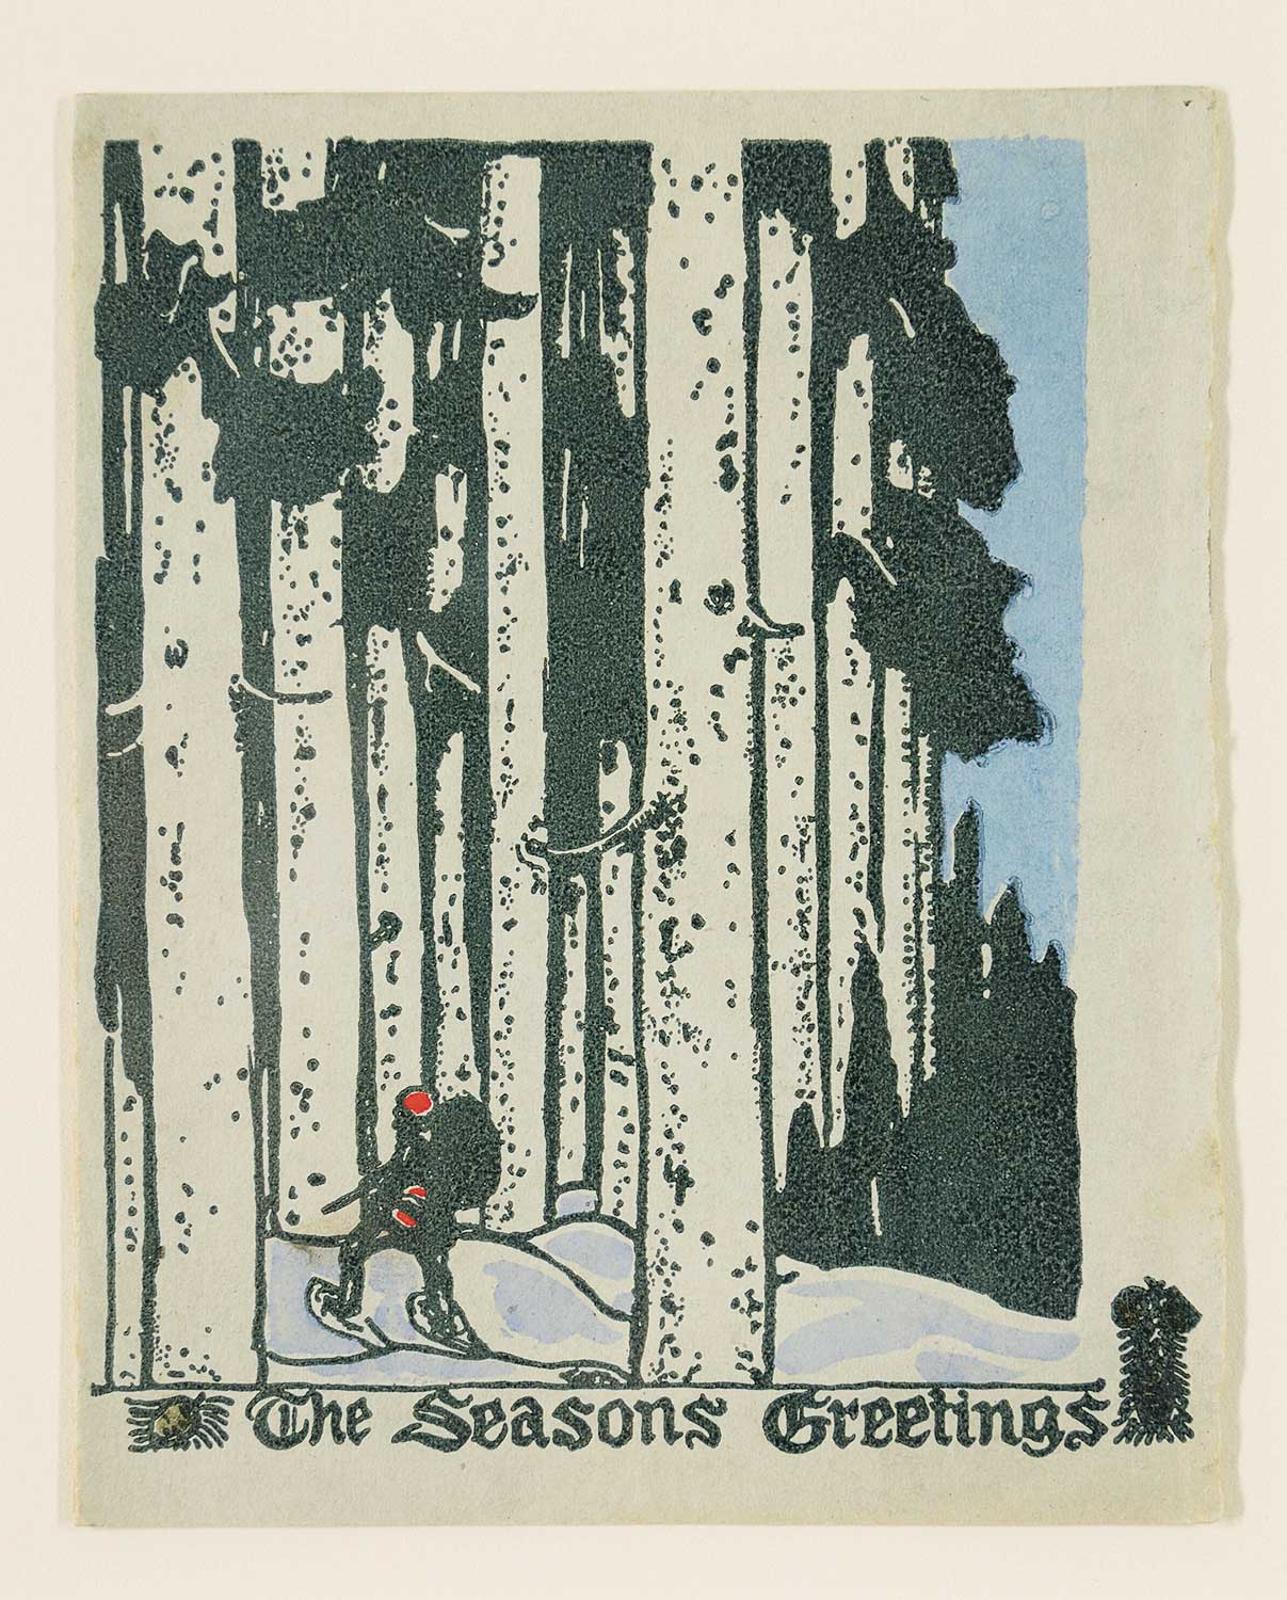 Alexander Young (A. Y.) Jackson (1882-1974) - The Season's Greetings